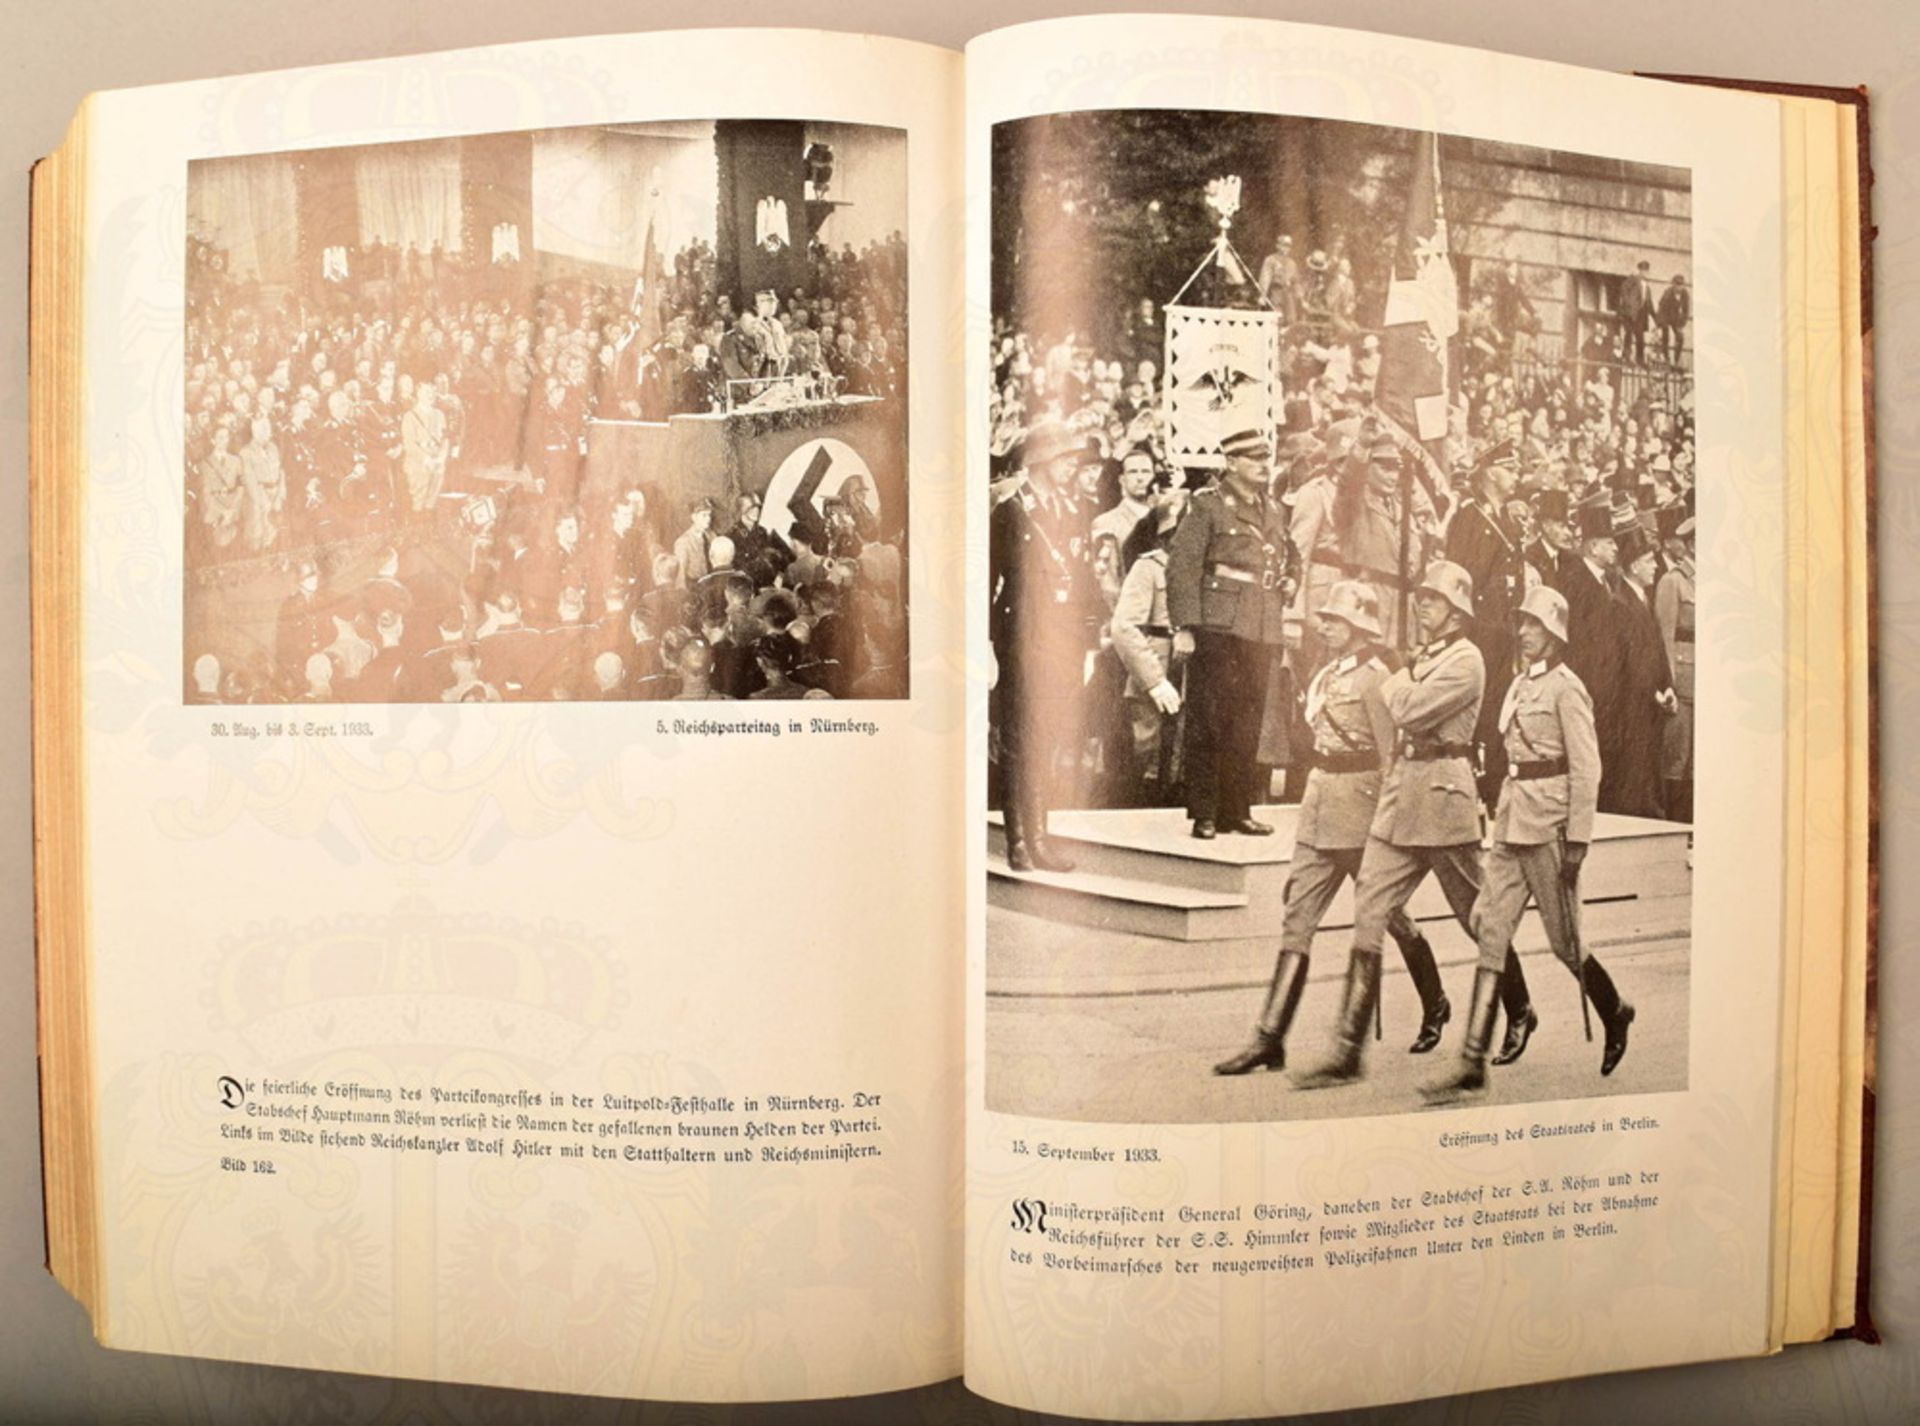 The book of the NSDAP 1933 - Image 4 of 4